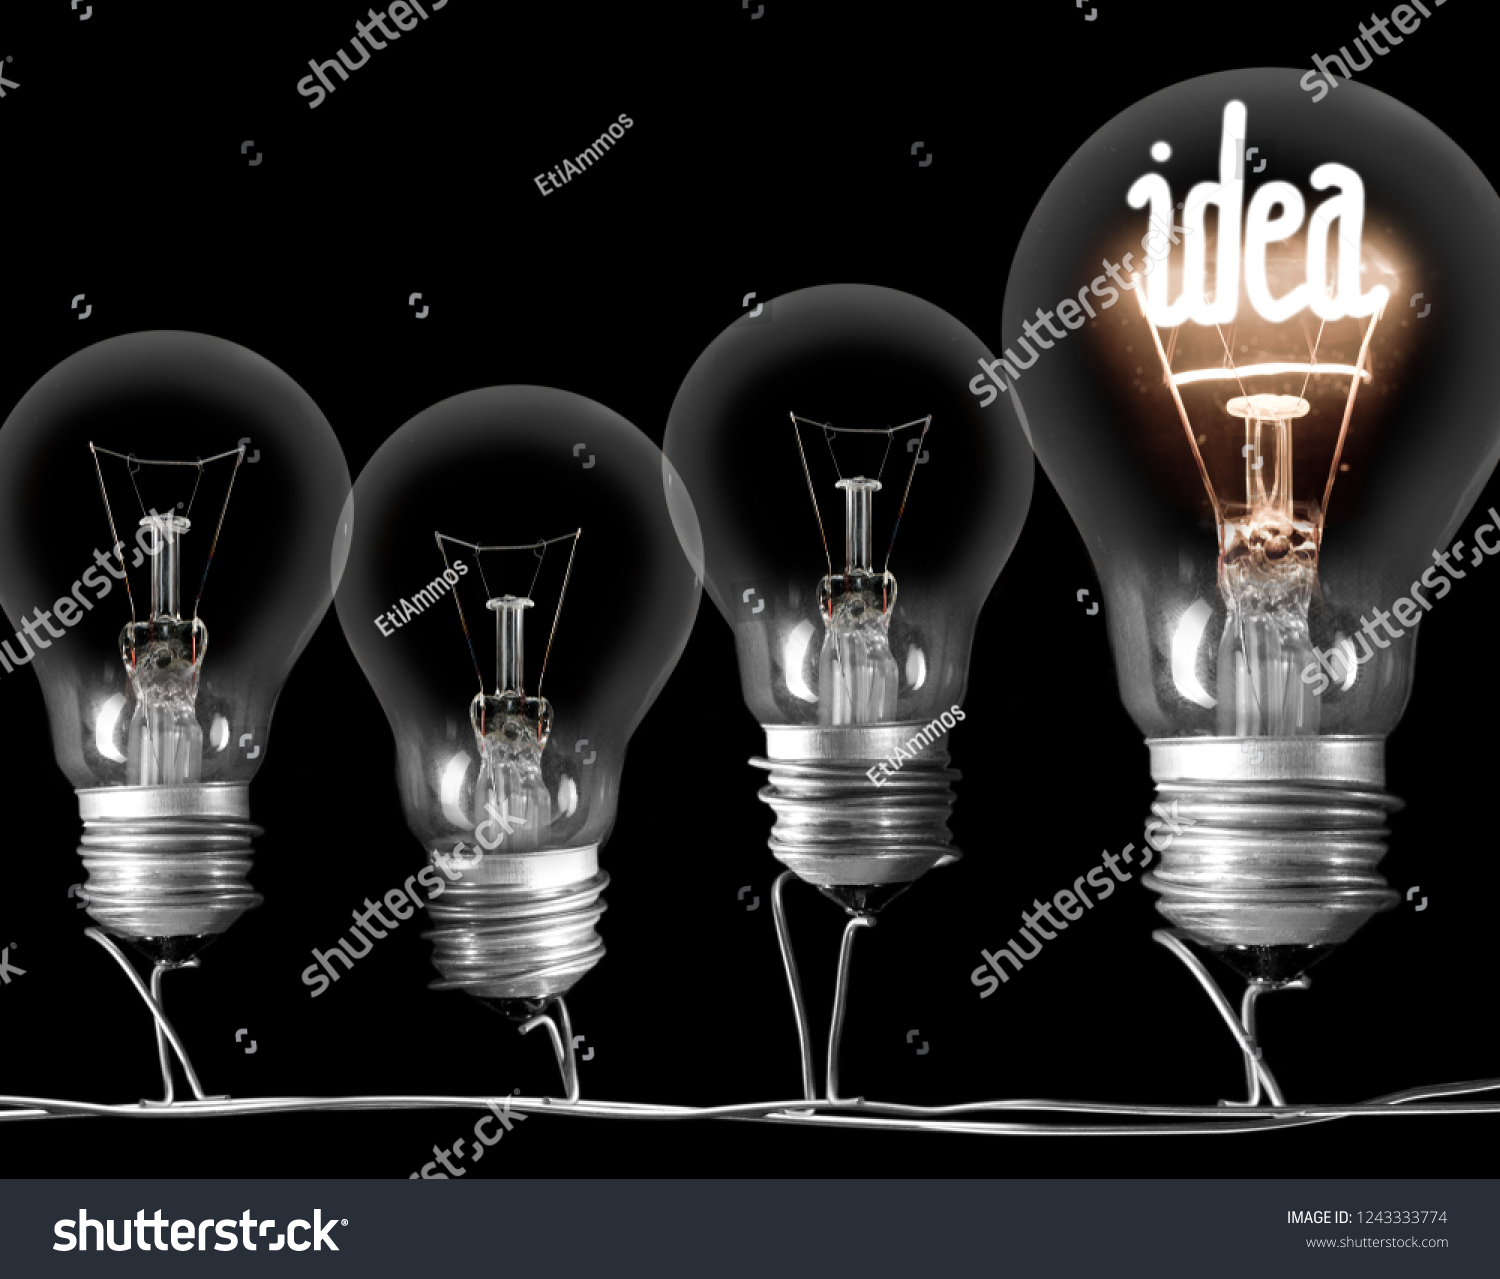 Photo of dark and shining light bulbs with fibe in IDEA shape; concept of idea, innovation, uniqueness and standing out; isolated on black background #1243333774